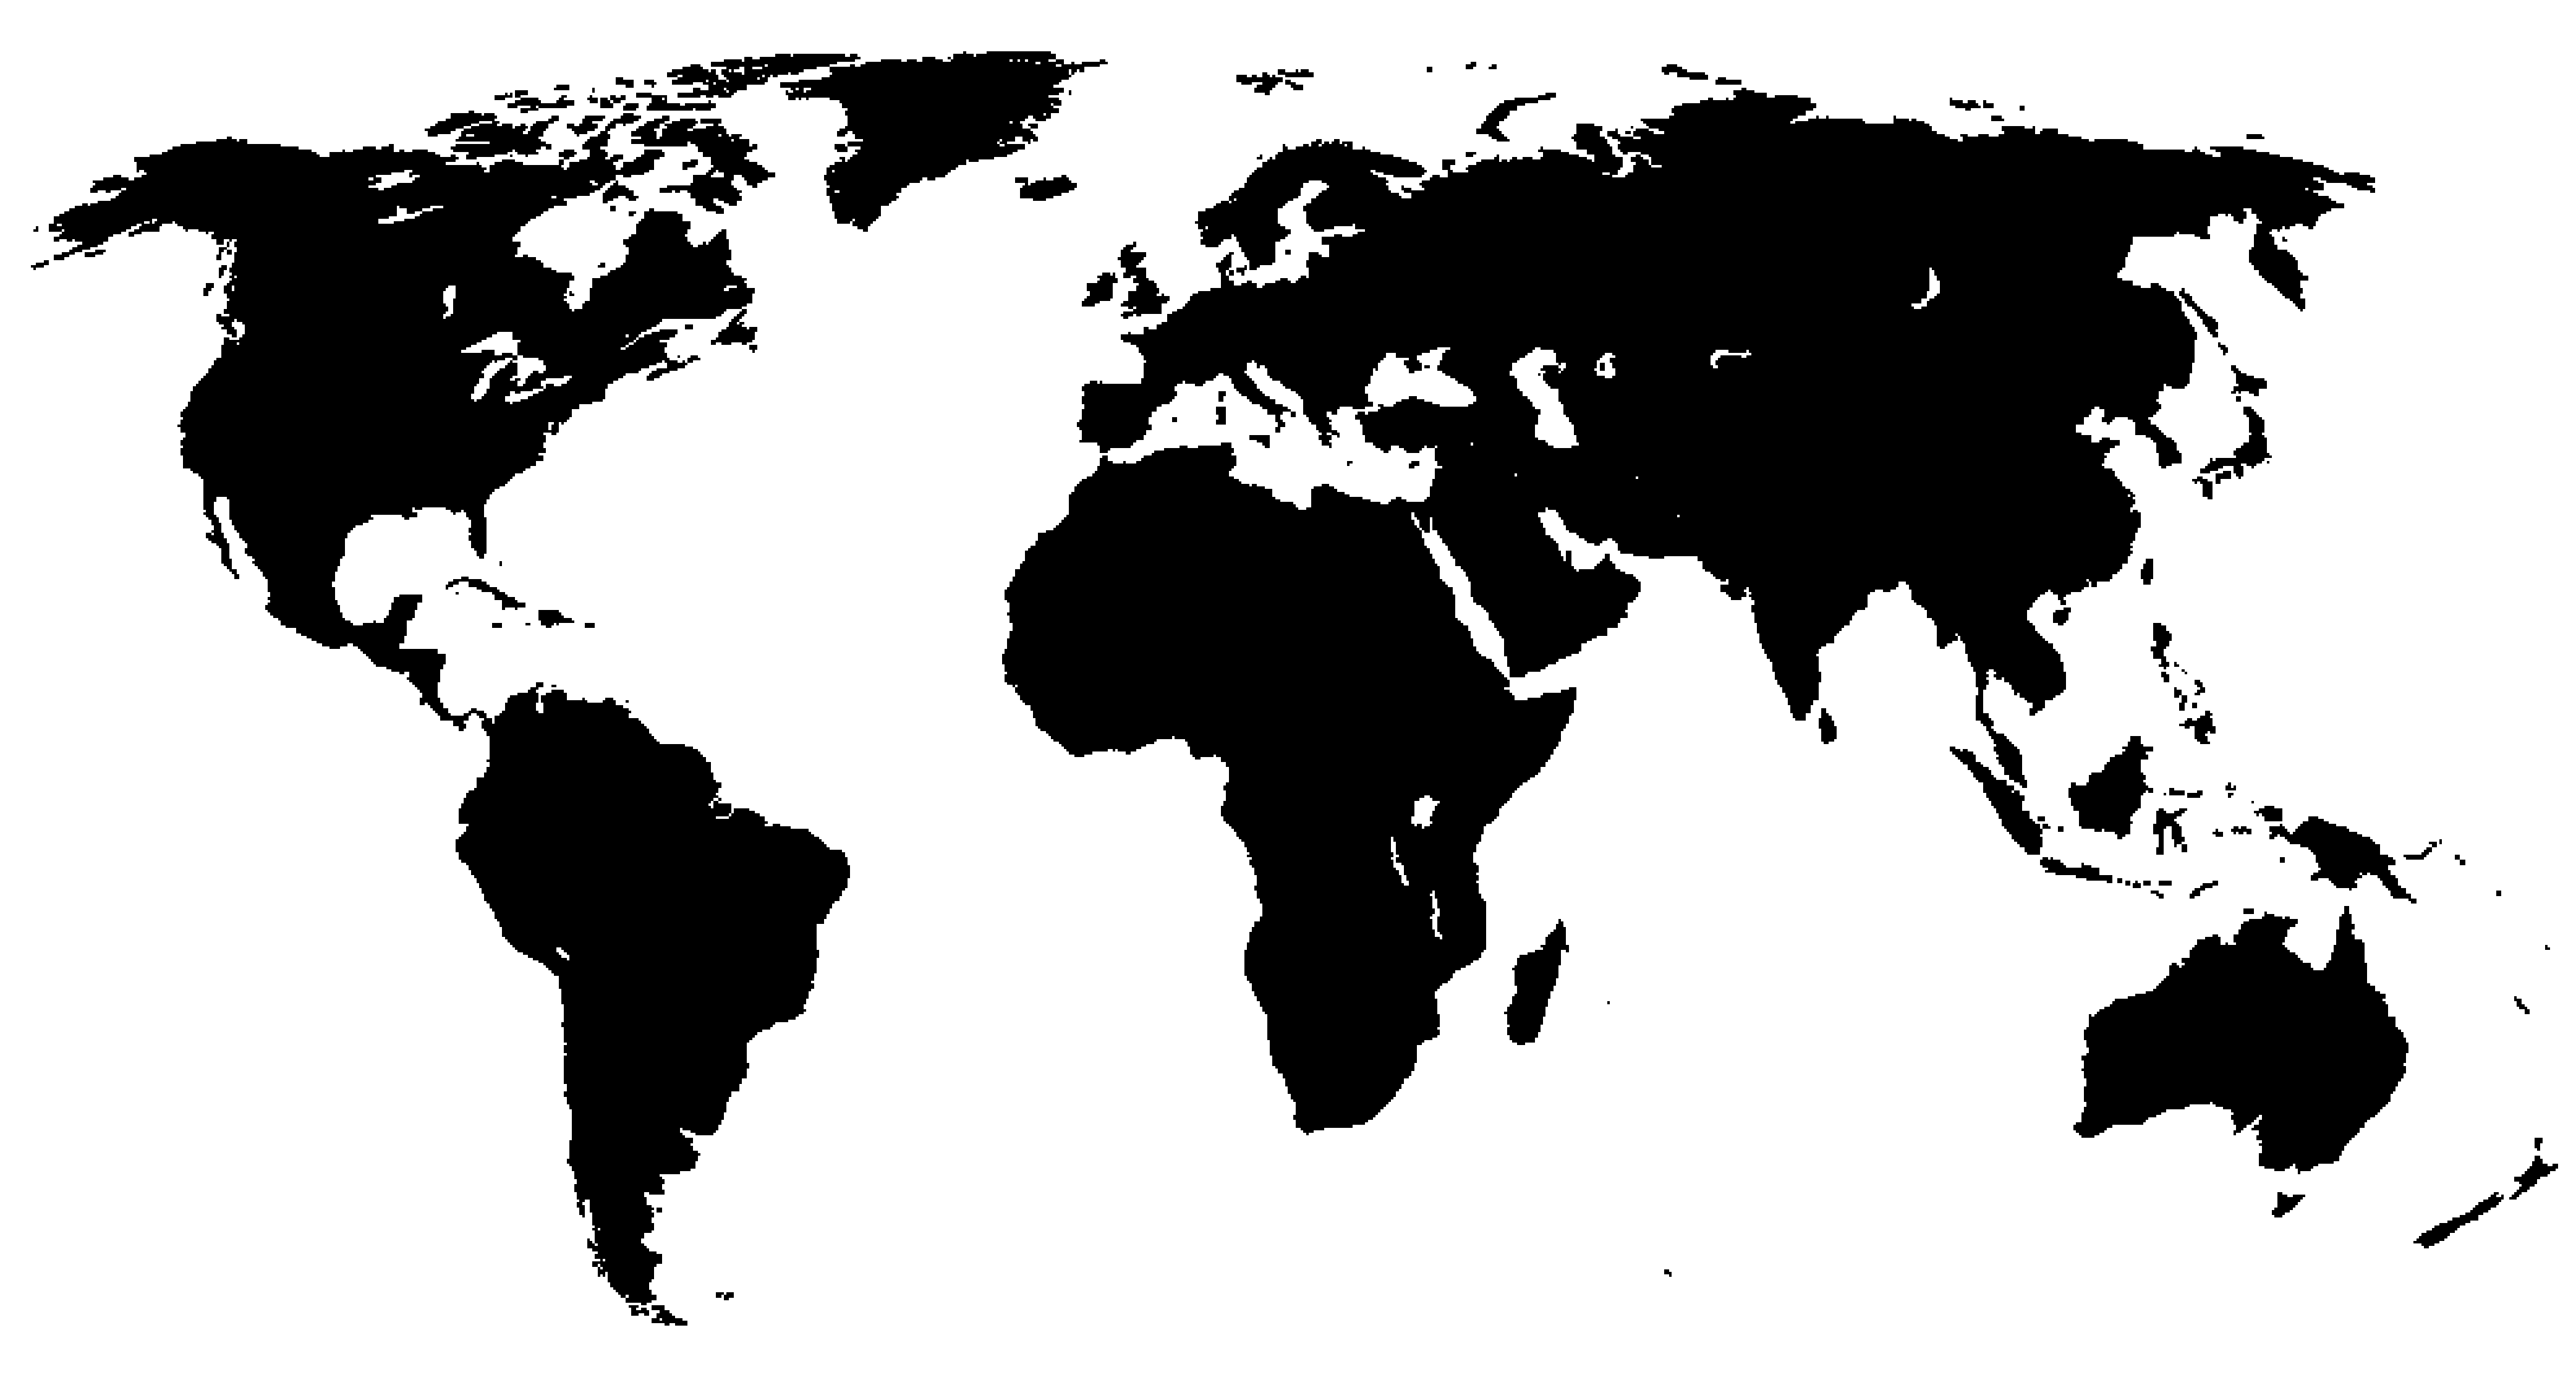 World Map Wallpaper For Windows 10 Copy Black And White The